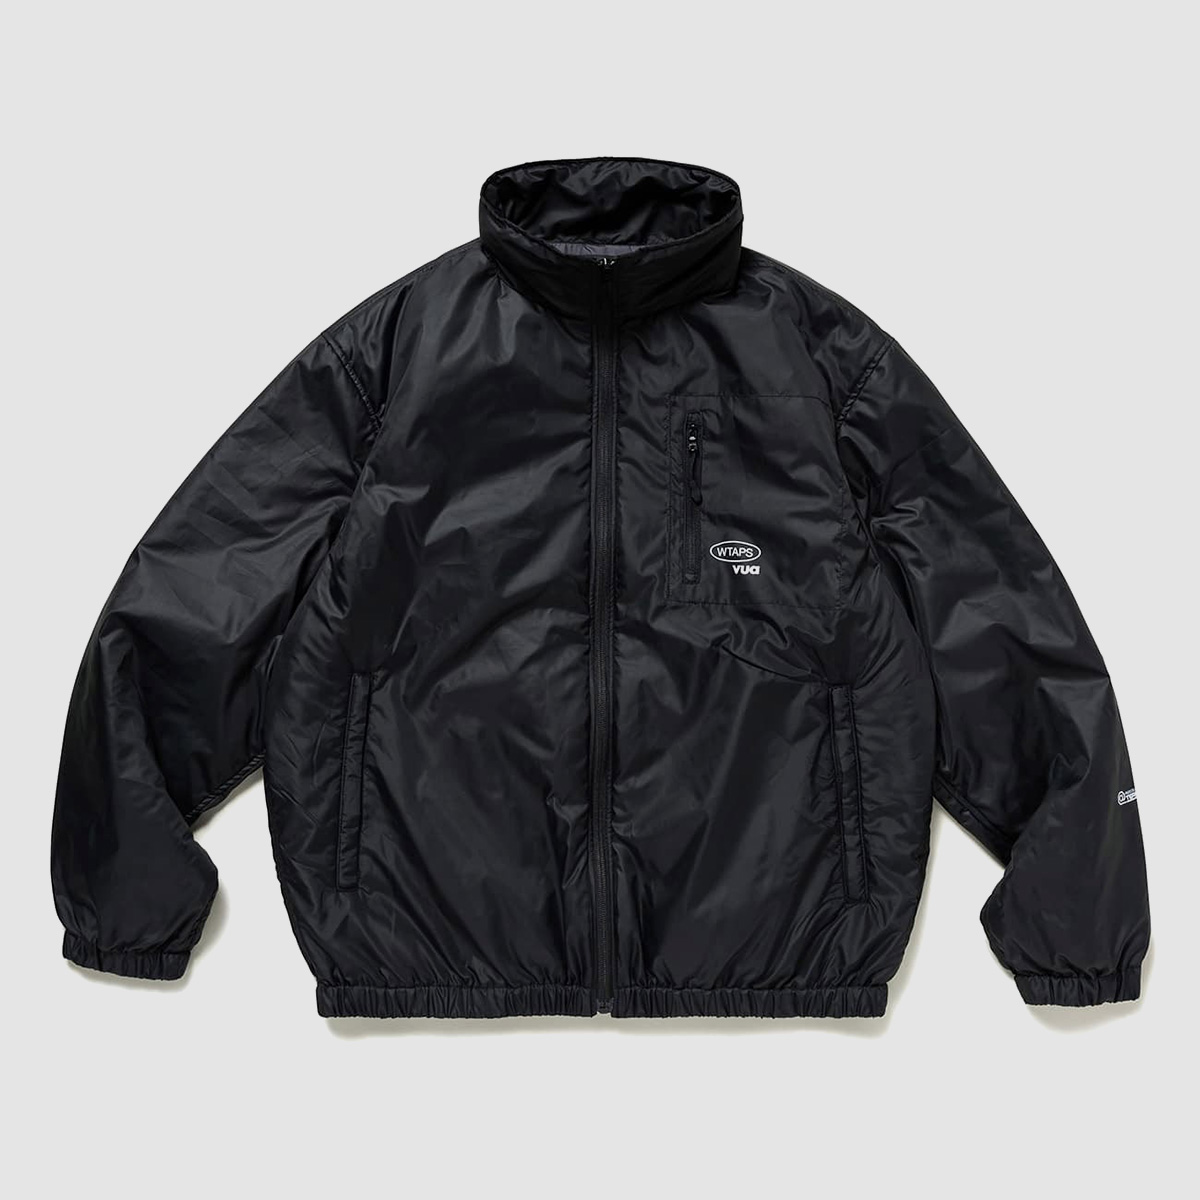 INVINCIBLE - TRACK / PADDED / JACKET / POLY. RIPSTOP. PROTECT